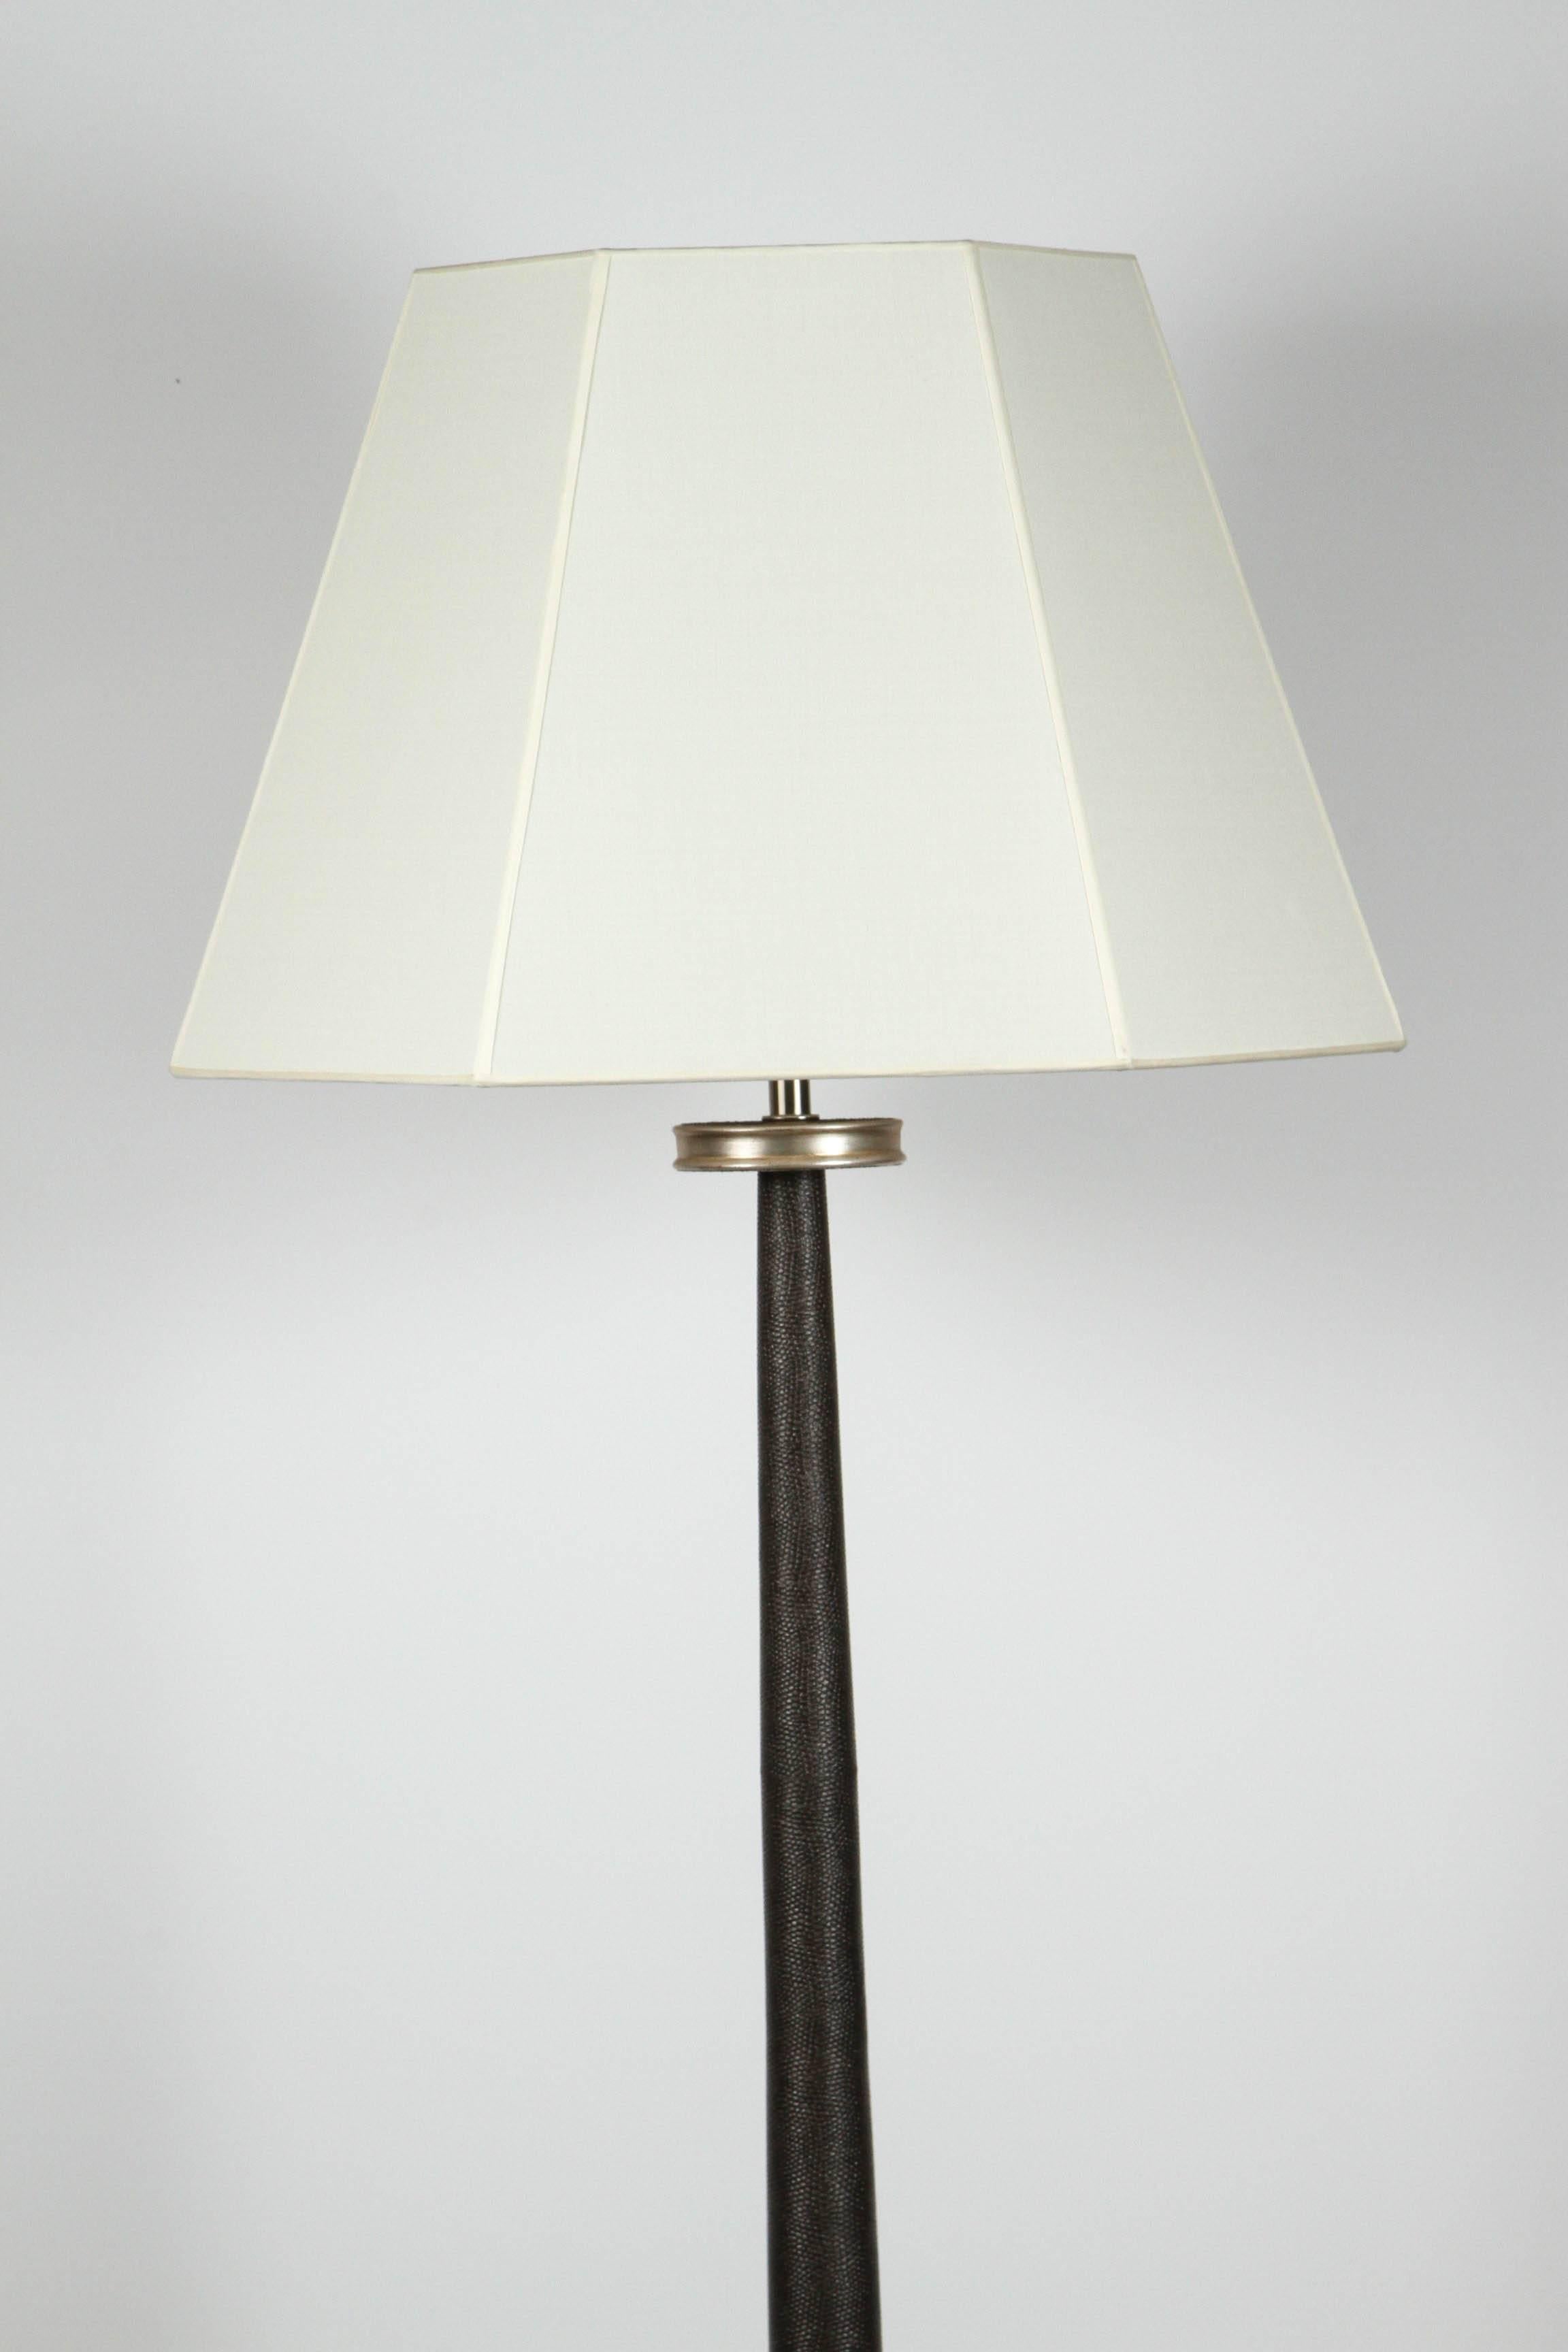 Paul Marra faux shagreen 1940s inspired floor lamp shown in mocha. By order. 12-karat white gold finished wood base, nickel hardware. Inquire regarding shades including hexagon shaped shade, shades available to order additional.